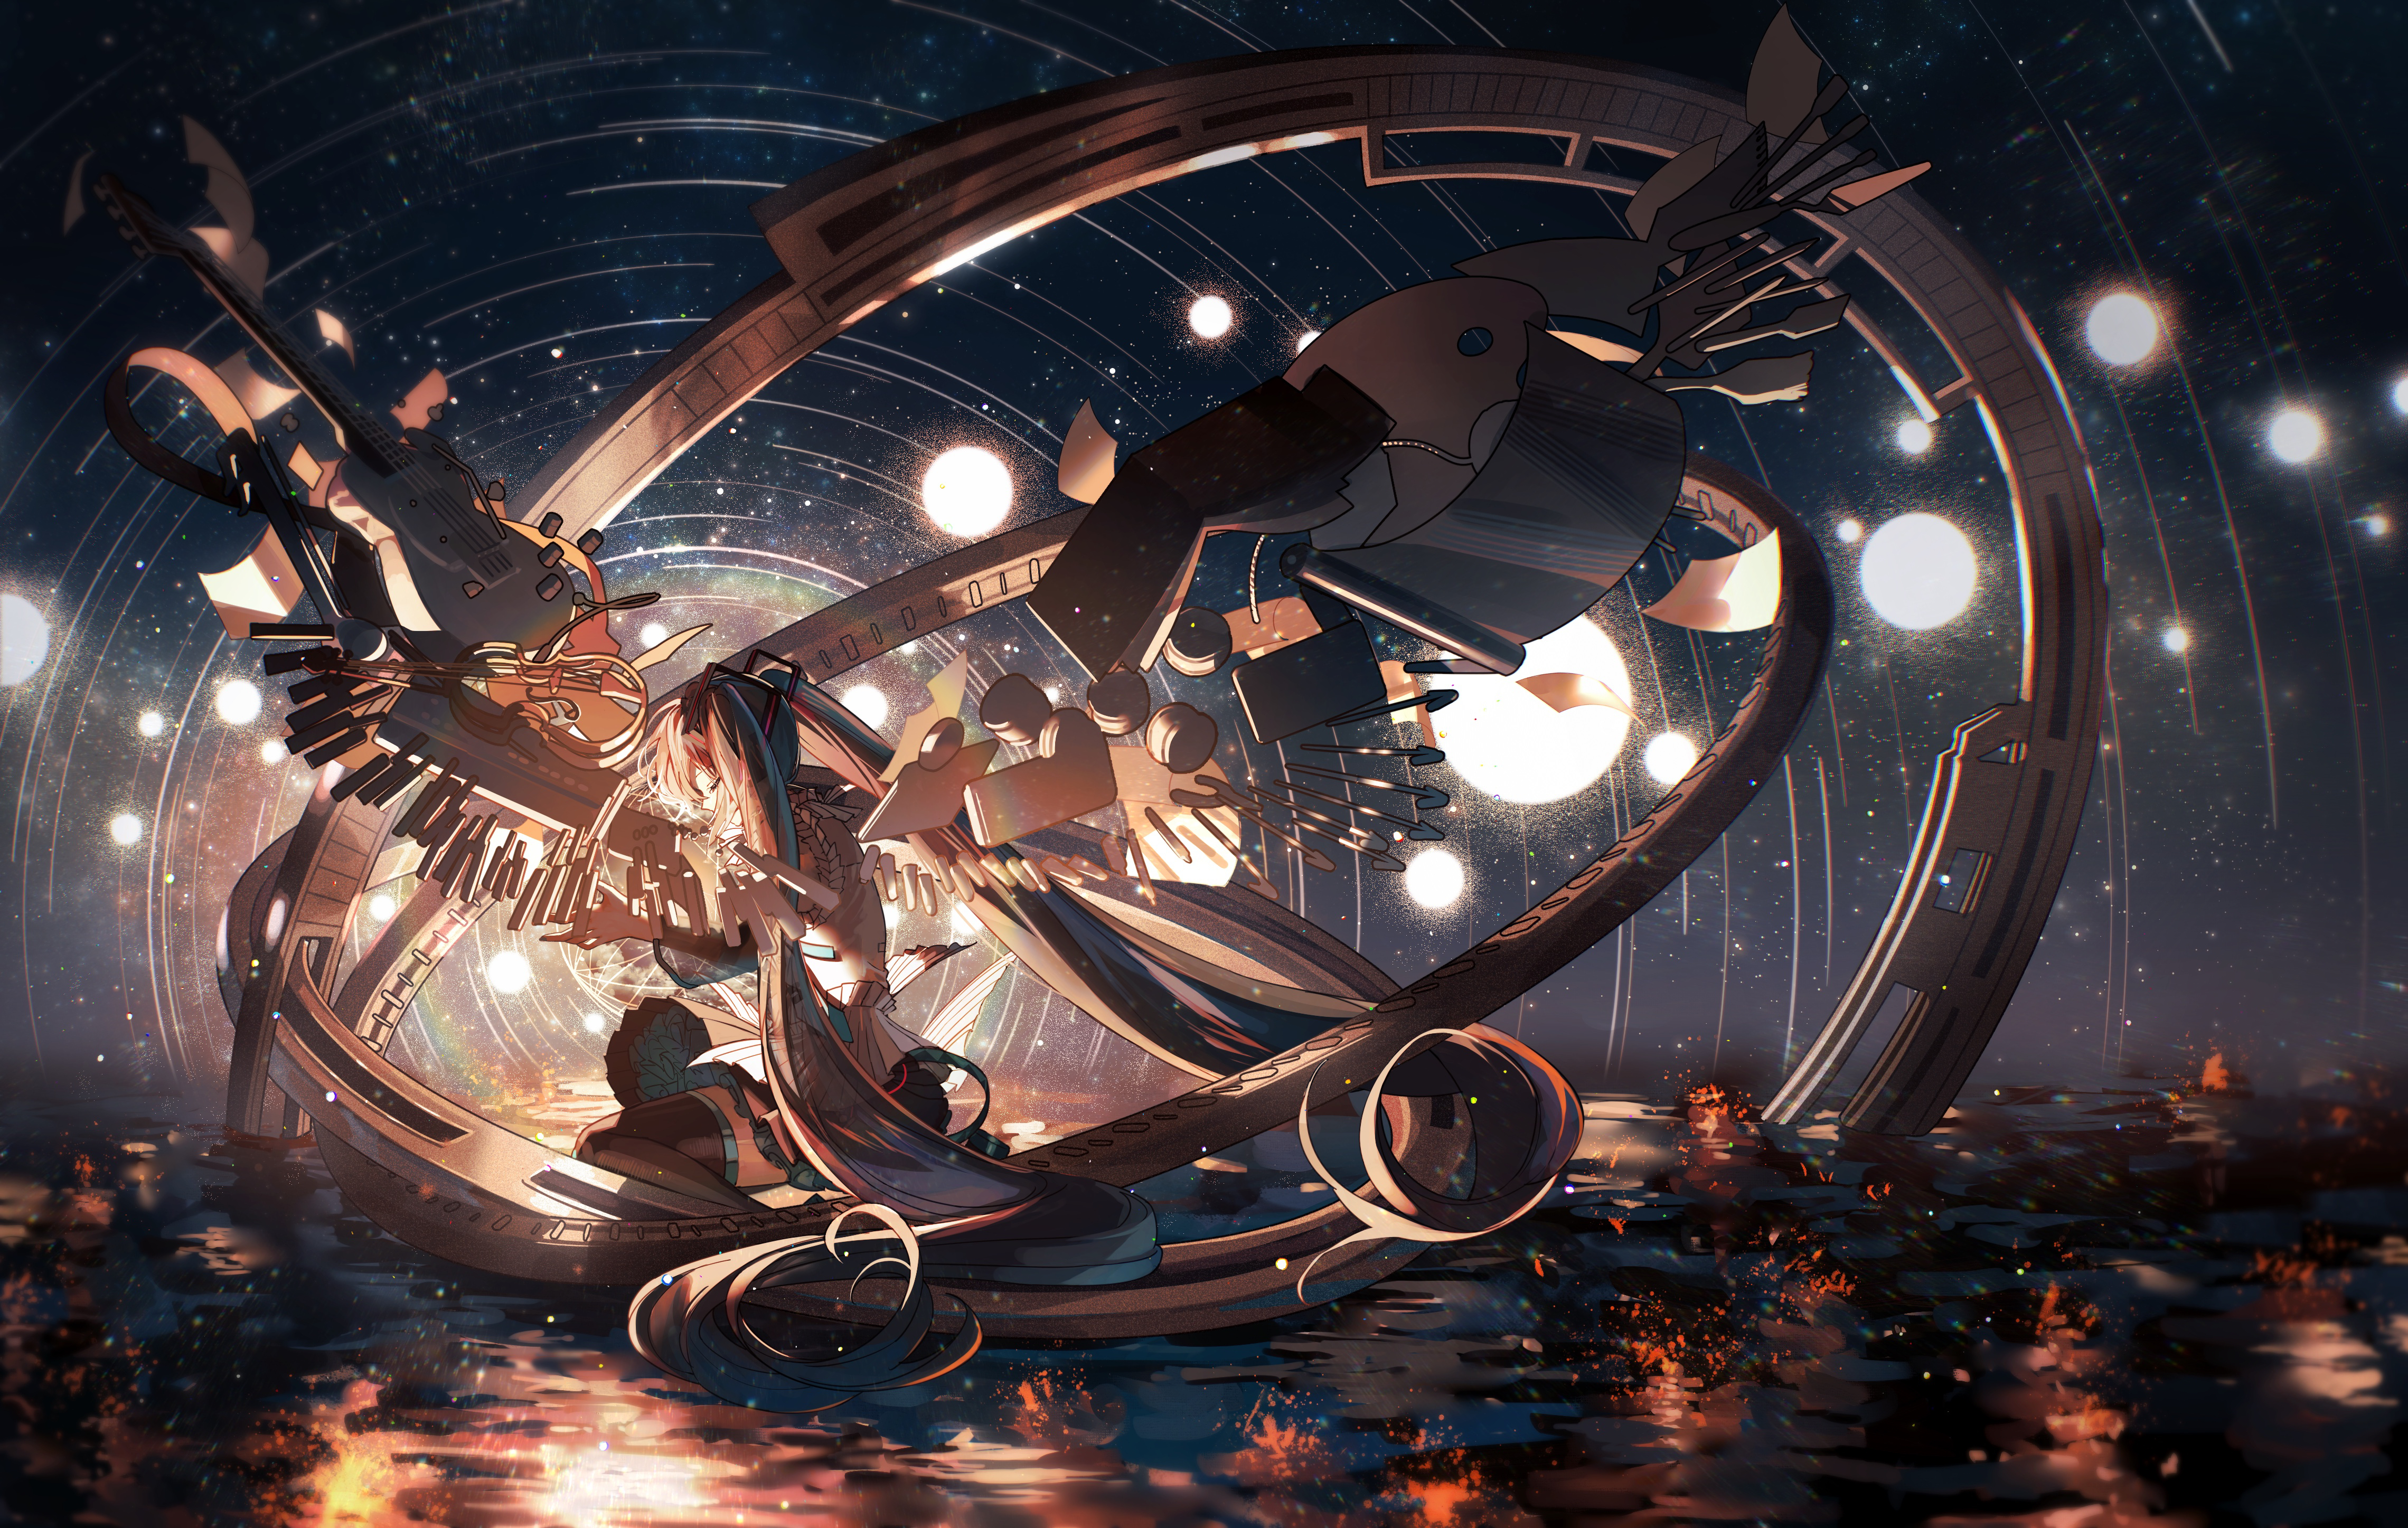 Anime Anime Girls Vocaloid Hatsune Miku Long Hair Twintails Closed Eyes Water Stars Night Sky Thigh  4560x2894